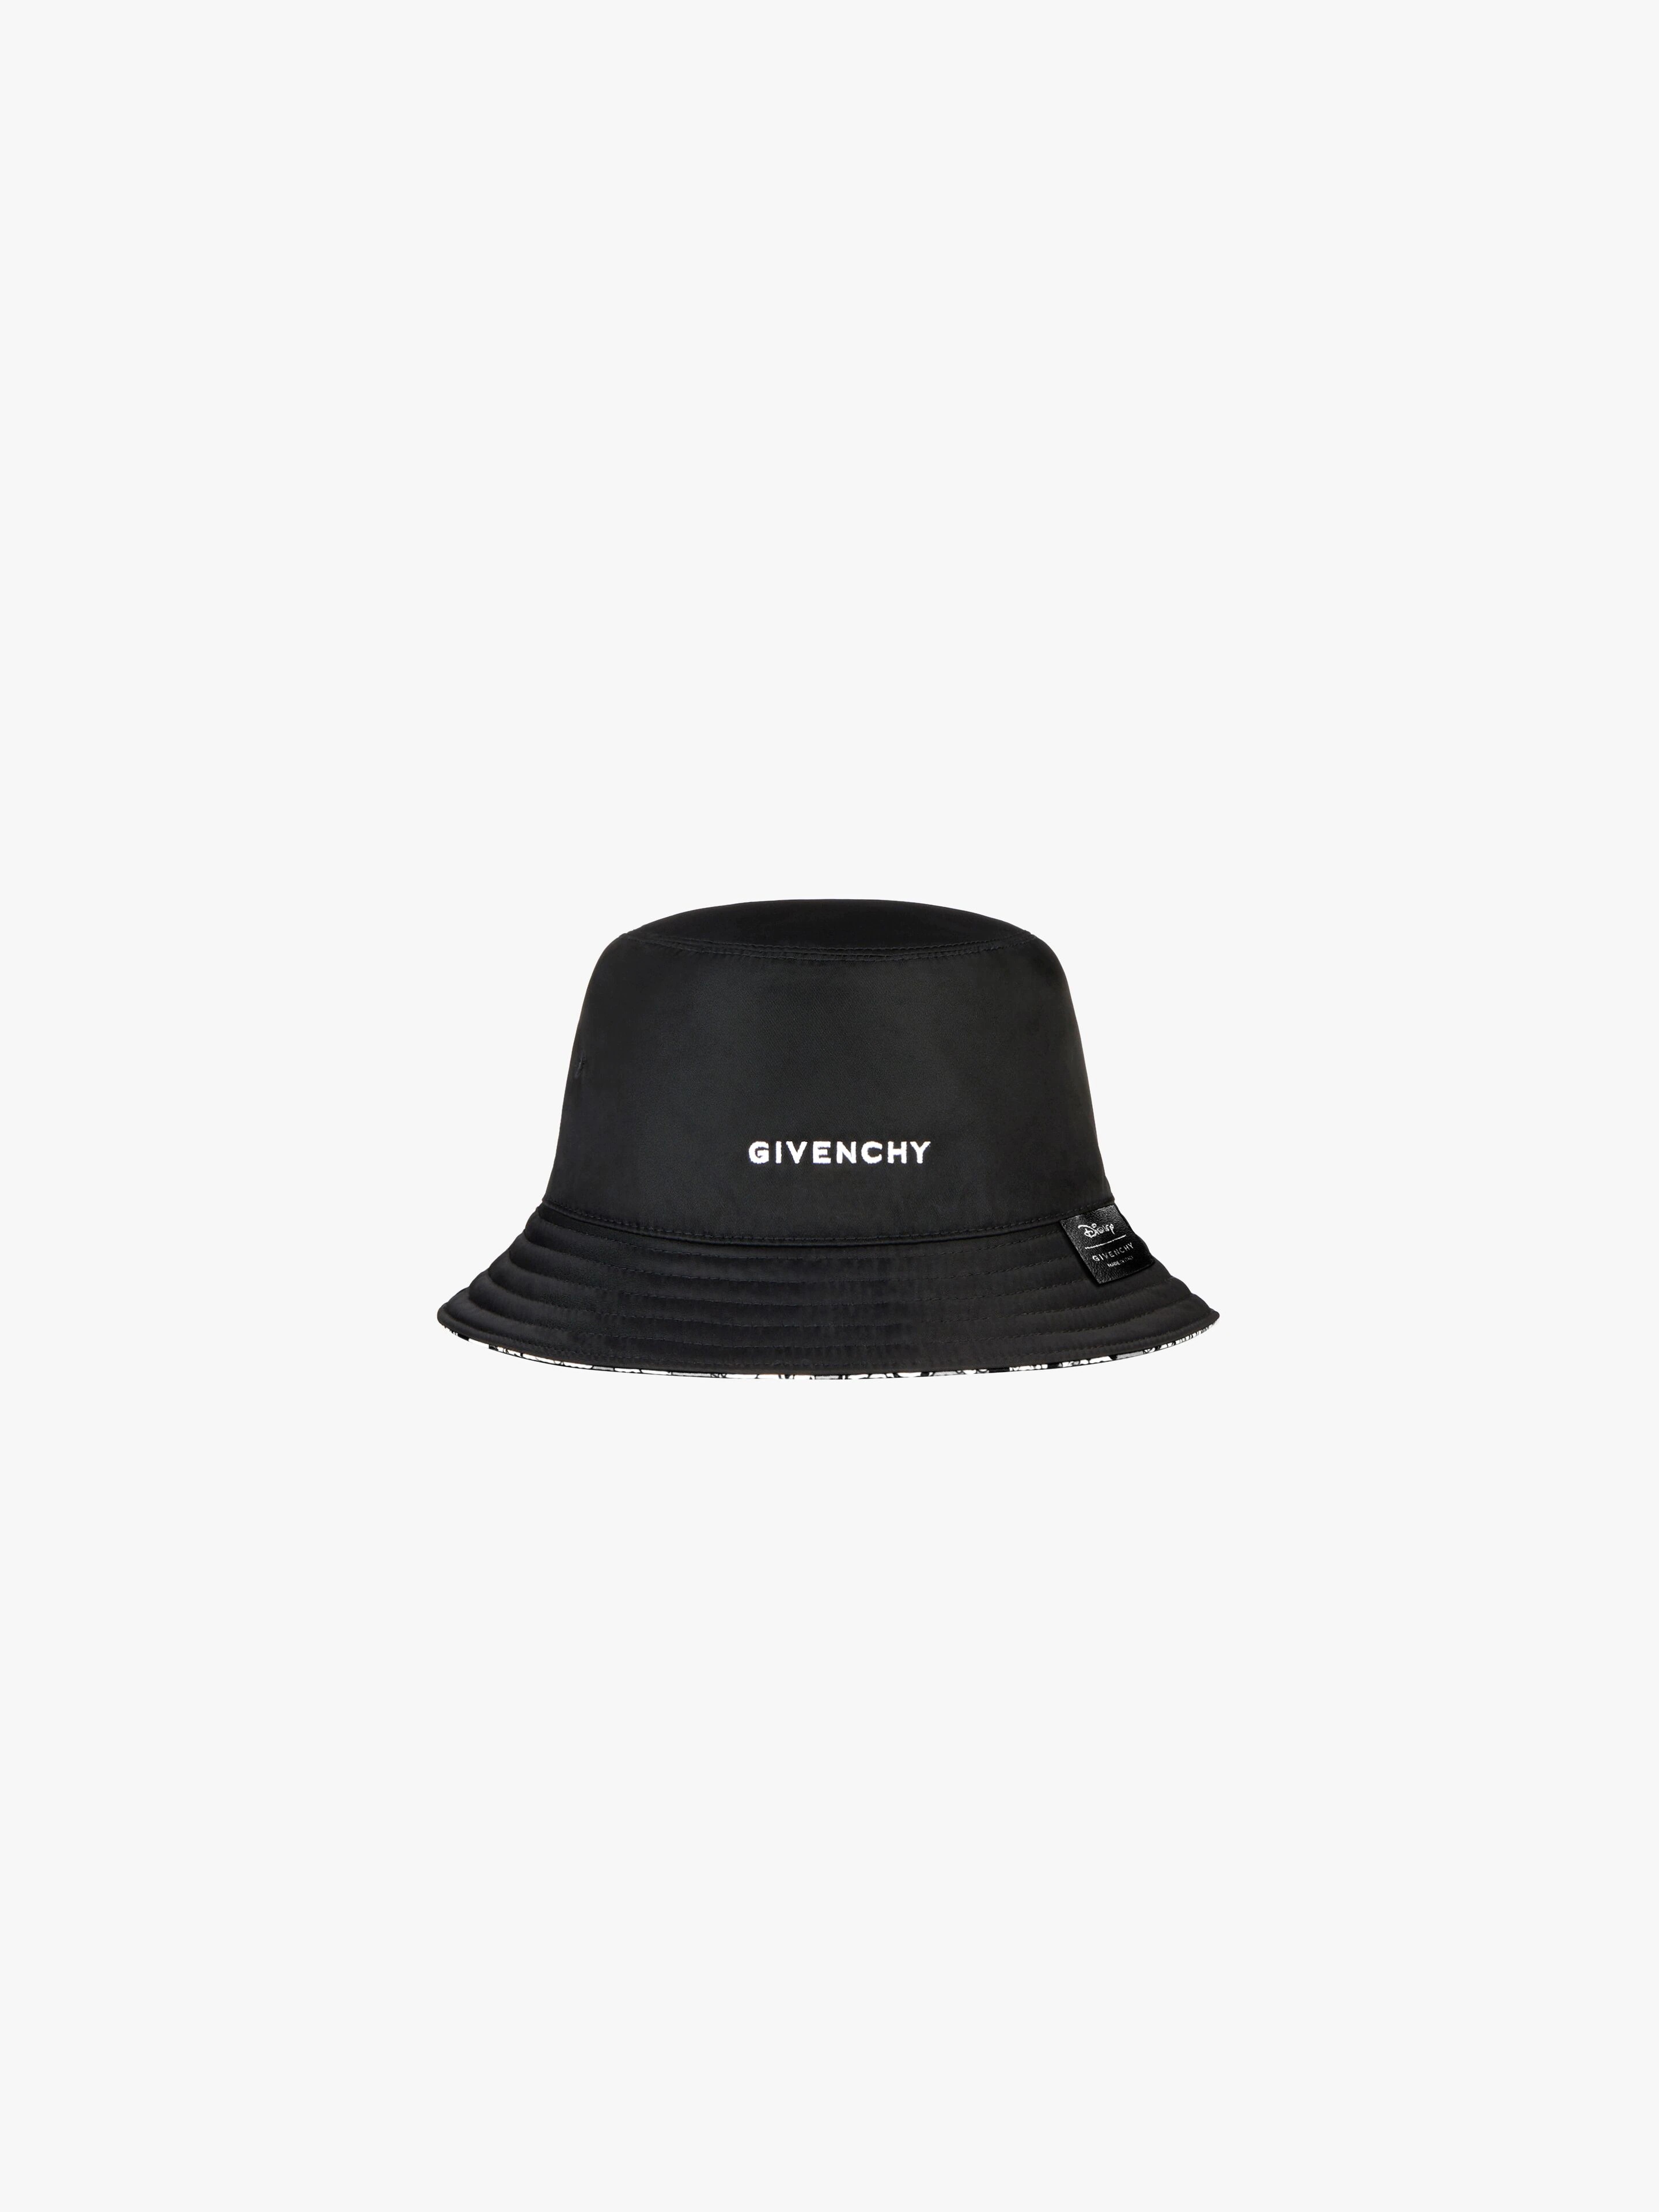 GIVENCHY 101 DALMATIANS REVERSIBLE BUCKET HAT IN PRINTED NYLON - 3